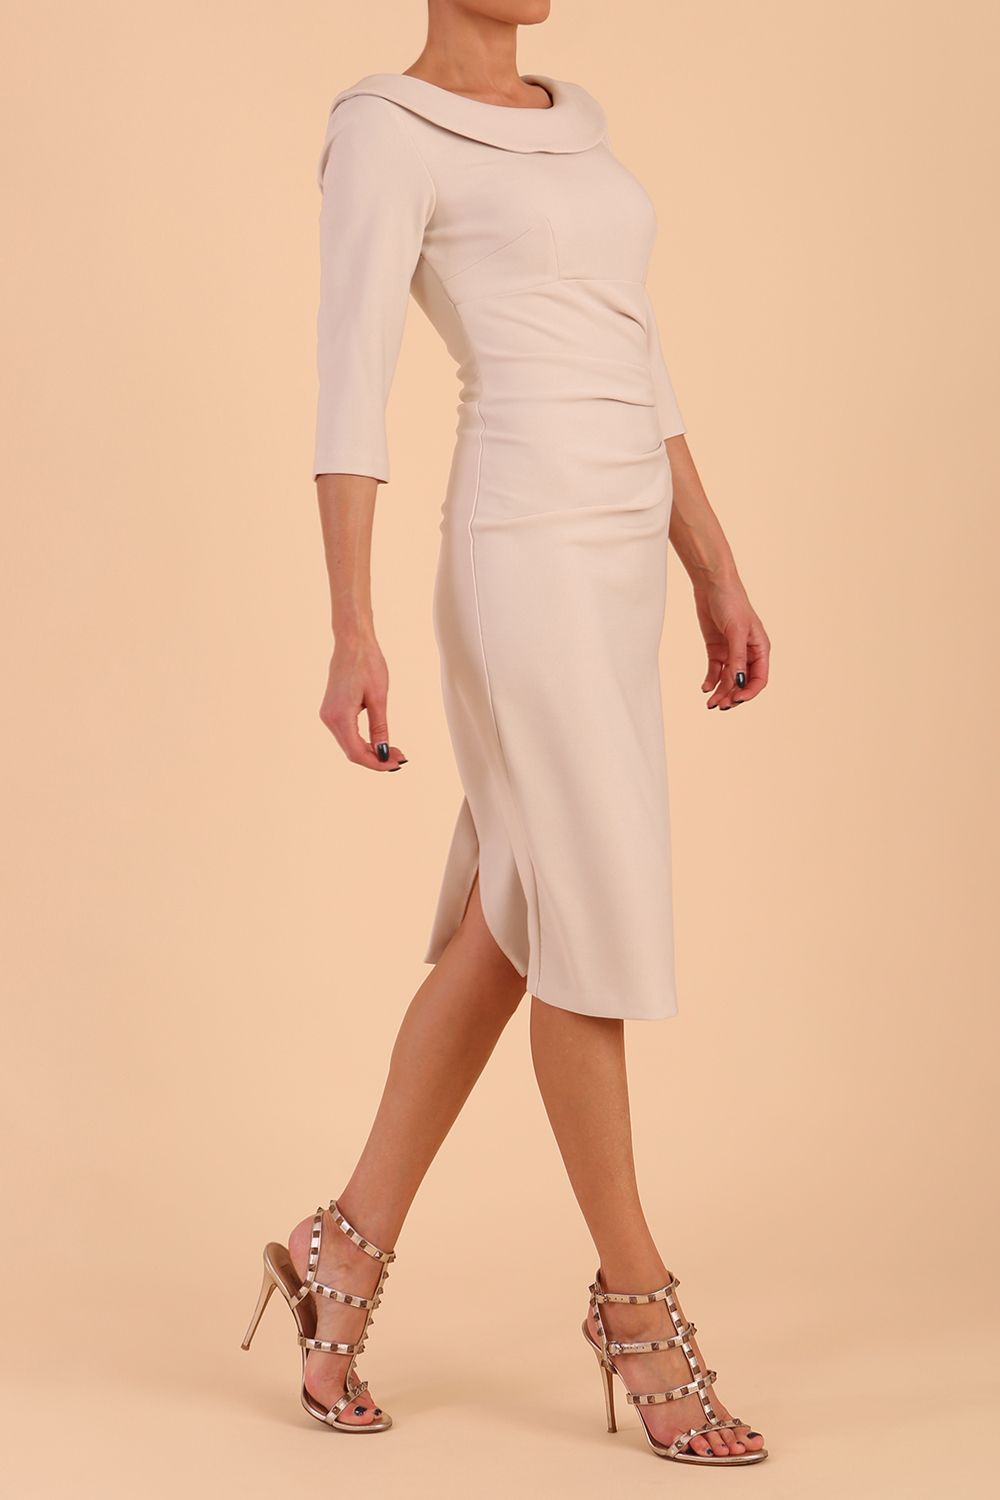 model is wearing diva catwalk seed axford pencil sleeved dress with rounded folded collar in Sandy Cream front side